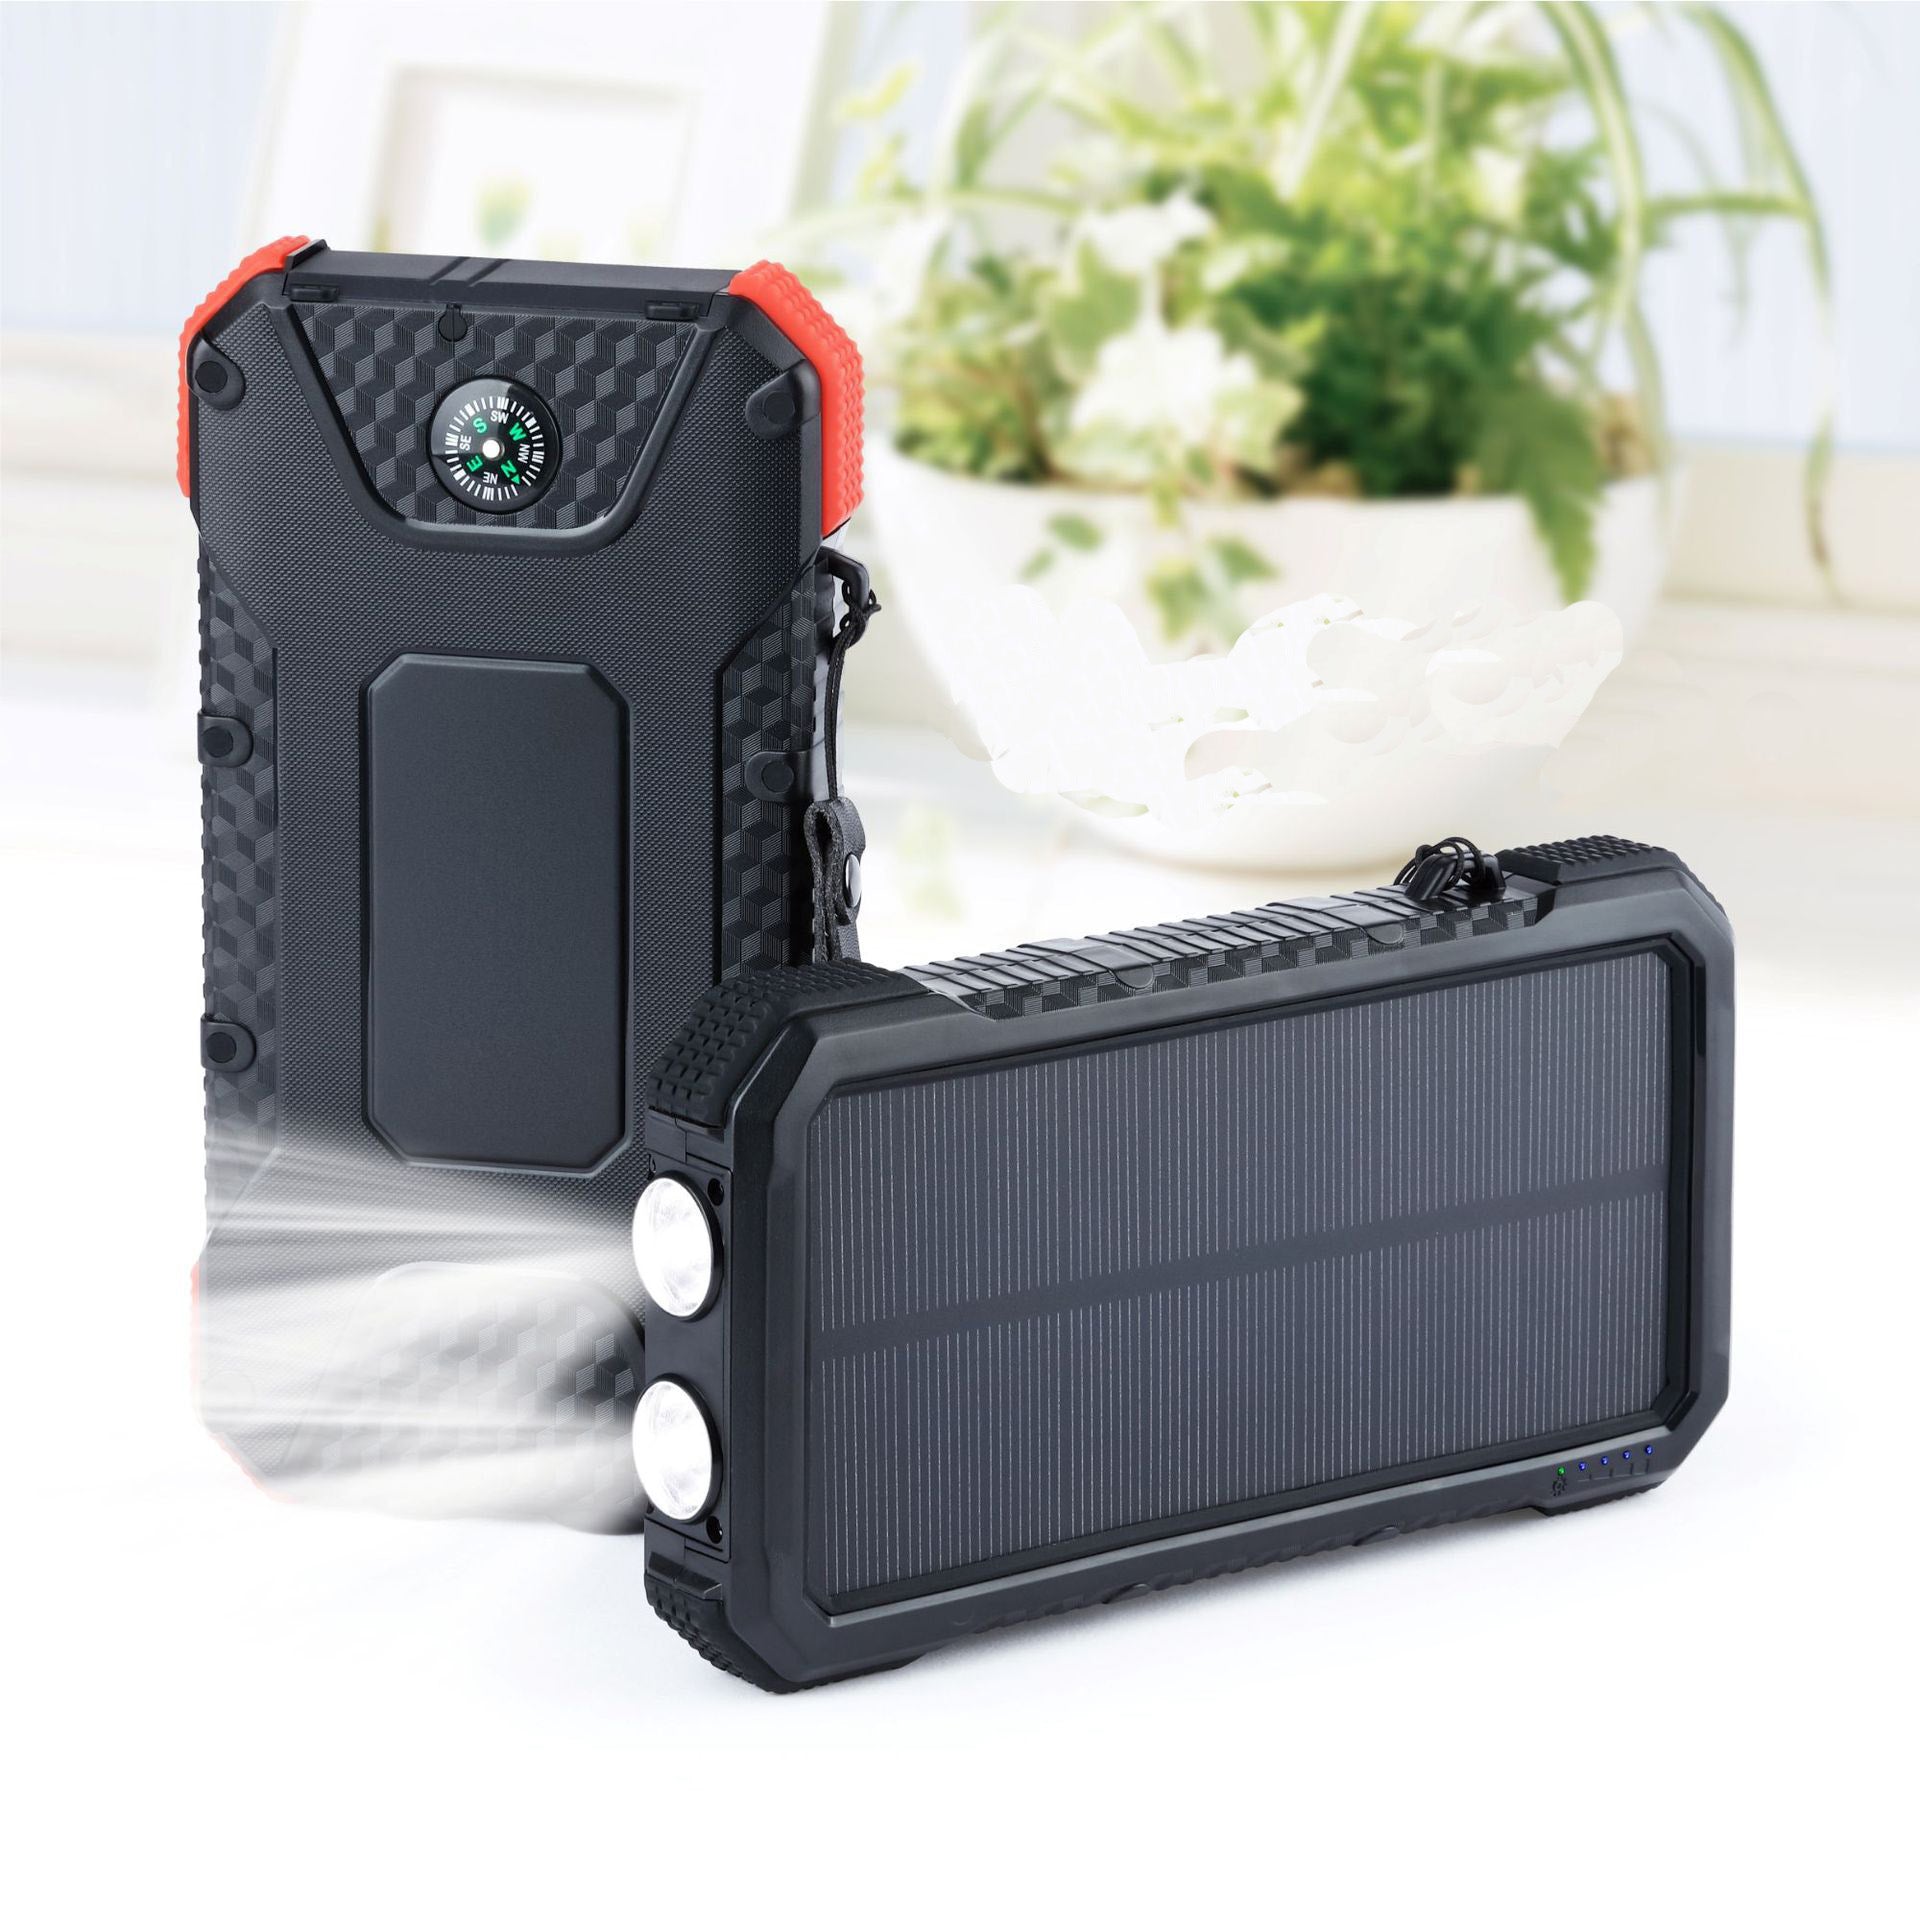 Solar Power Bank Outdoor 20000mAh Waterproof-  Super LED bright light with SOS and Compass